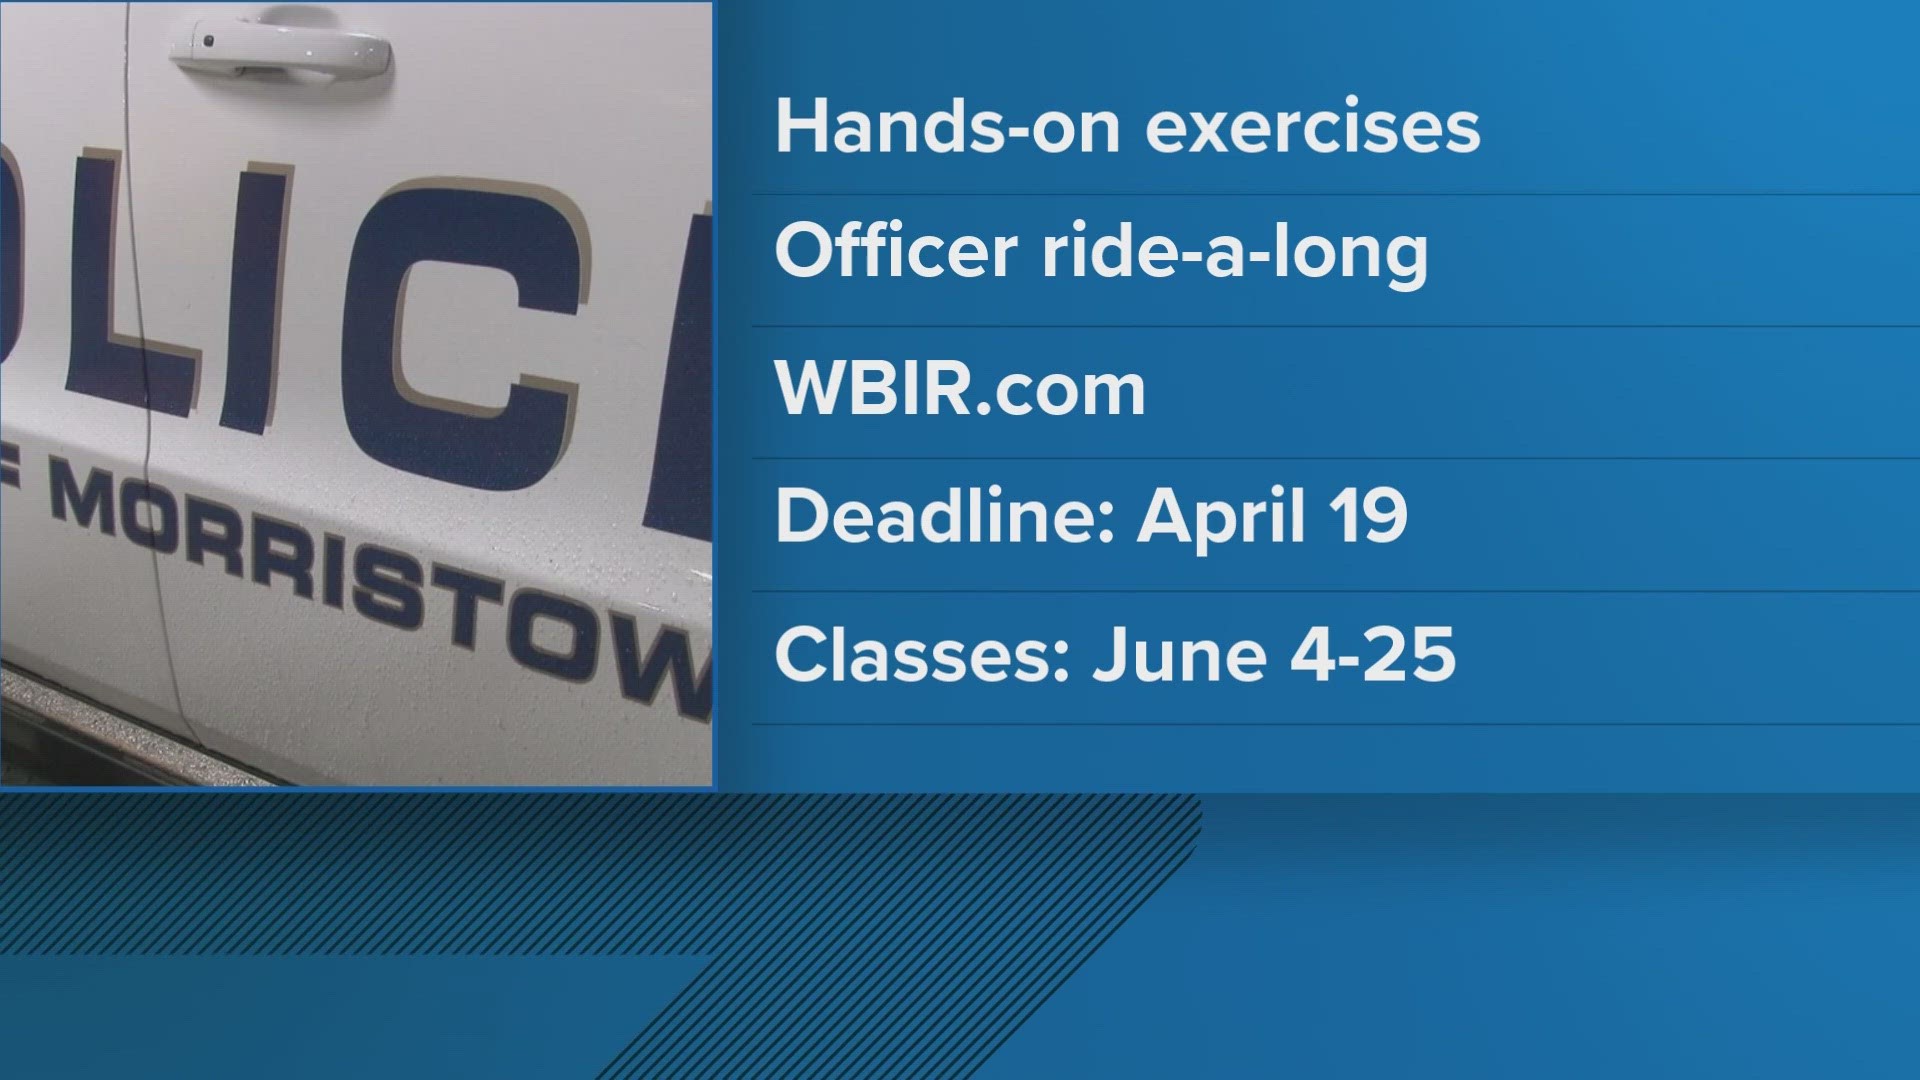 Participants will learn about the department through hands-on exercises and will also be allowed to complete an eight-hour ride along with an officer, MPD said.